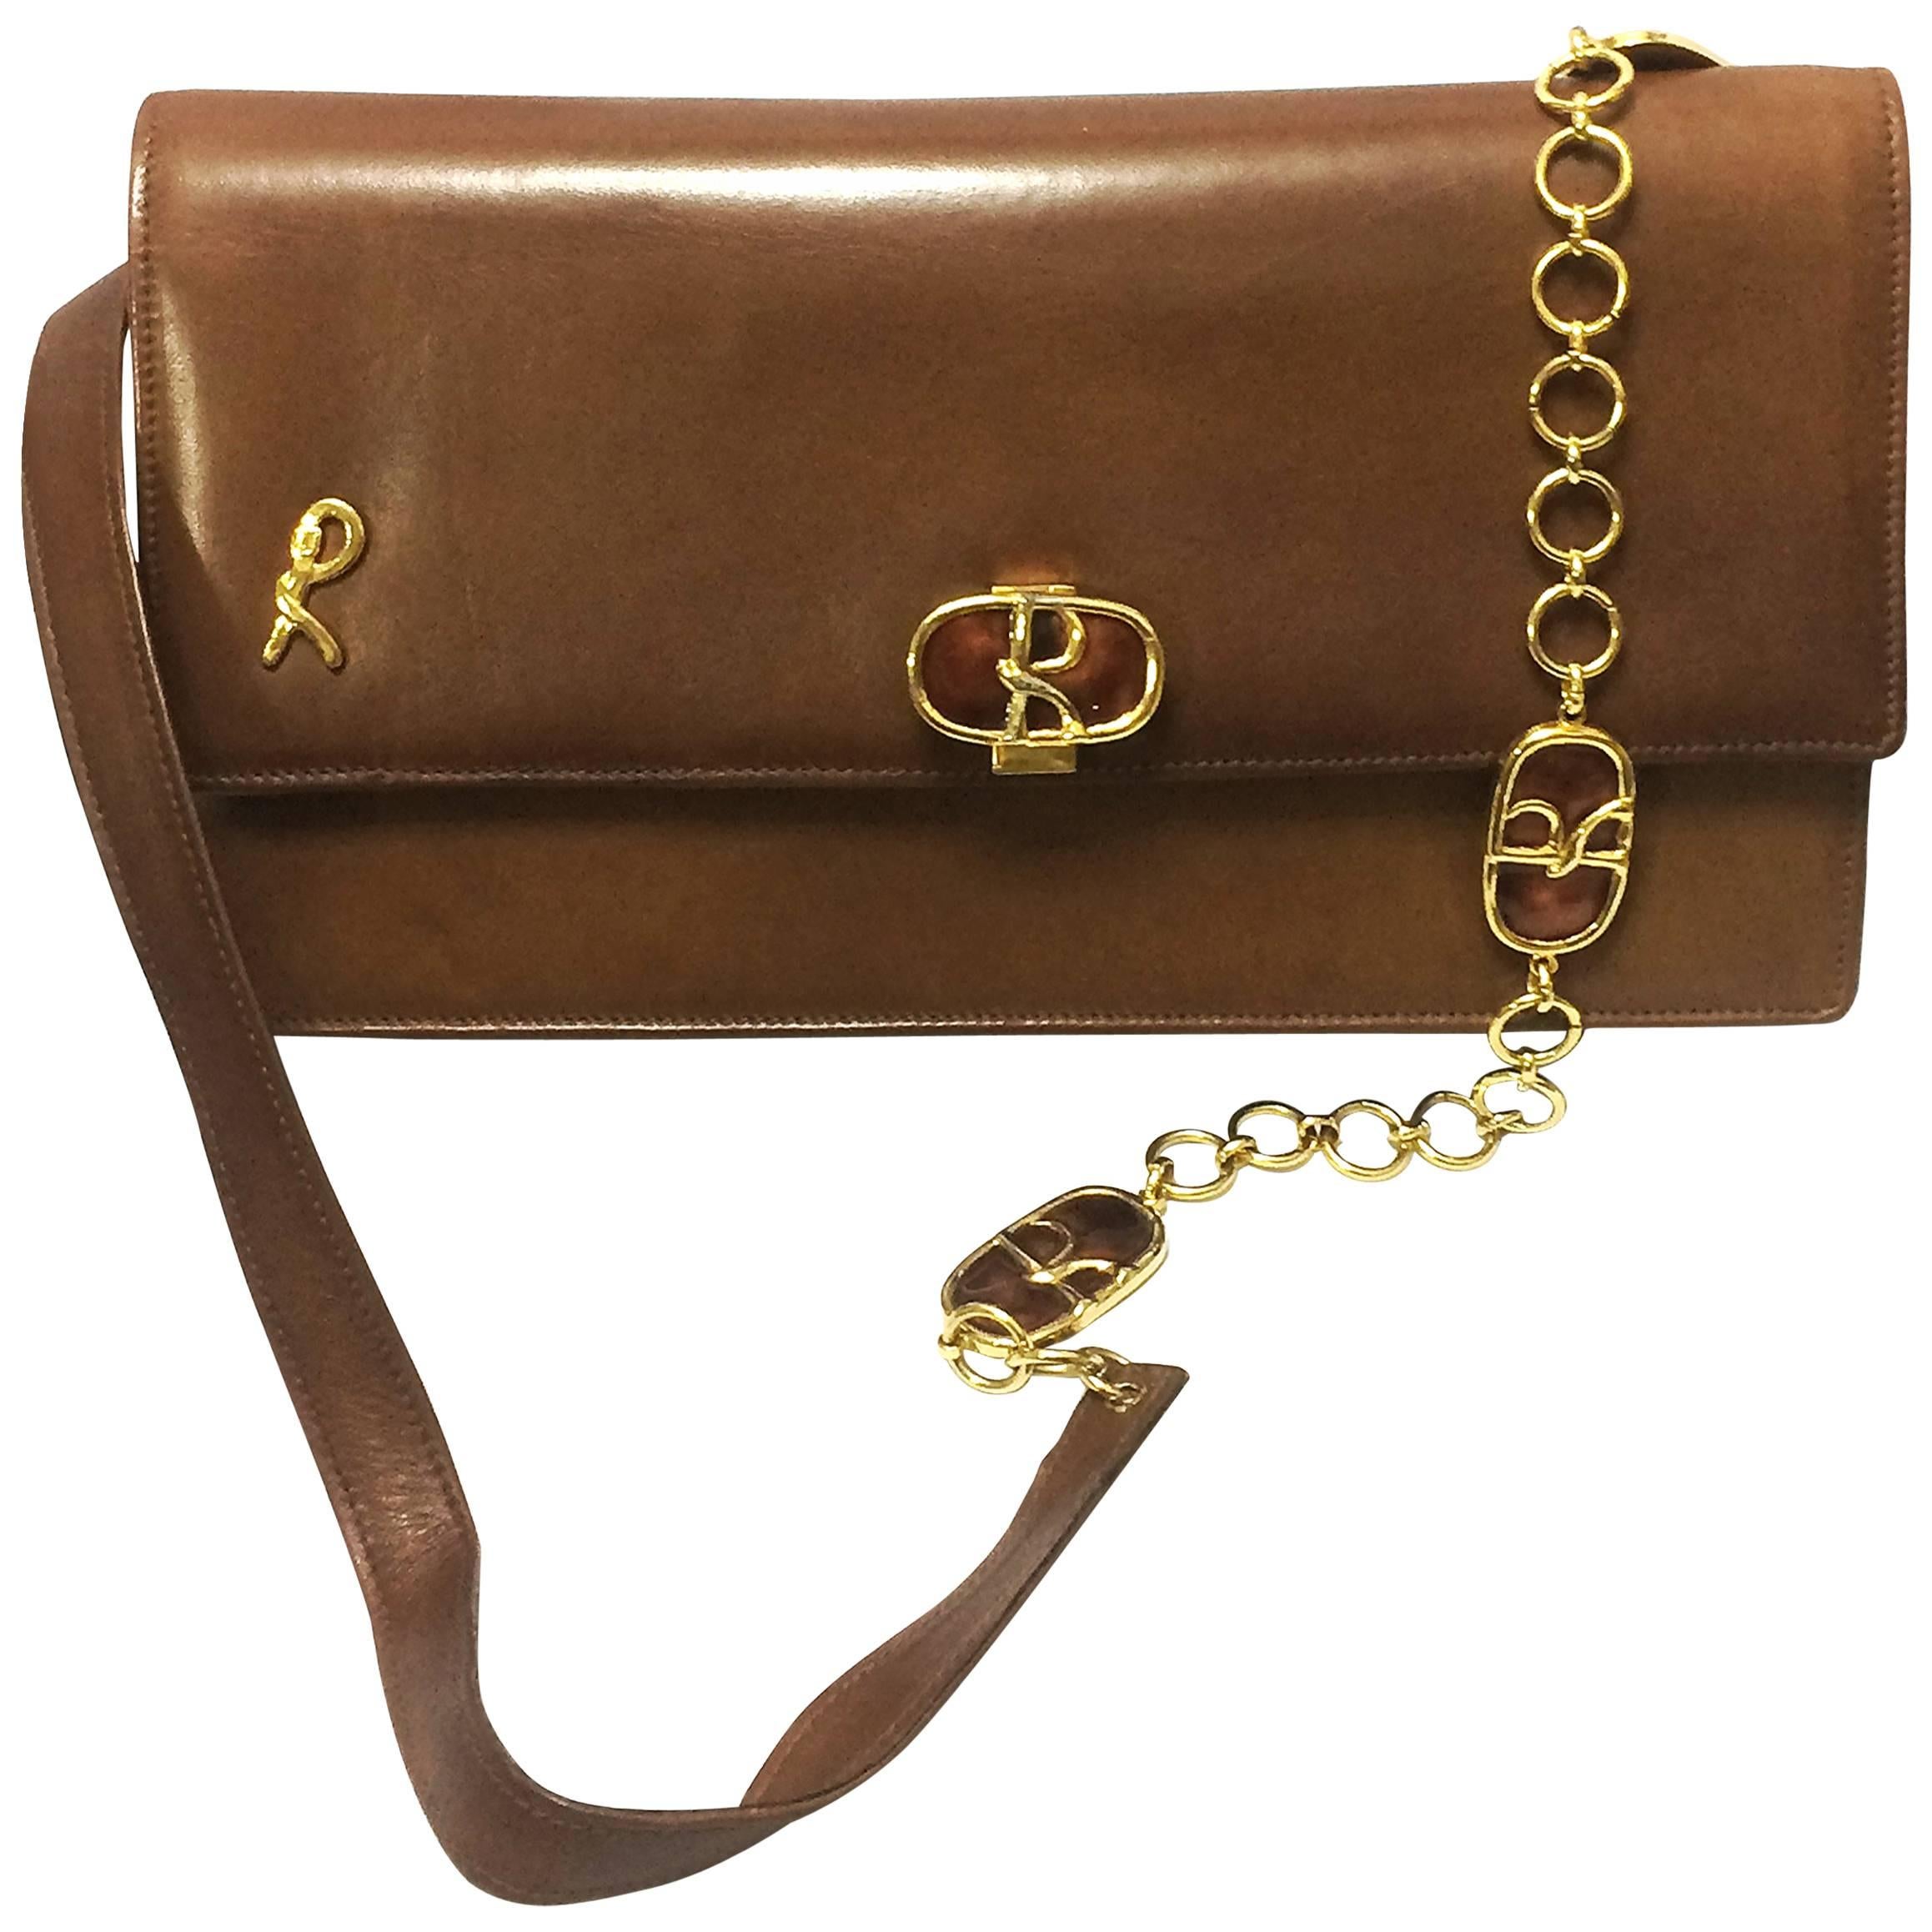 70's vintage Roberta di Camerino brown genuine leather purse with R cham chains. For Sale